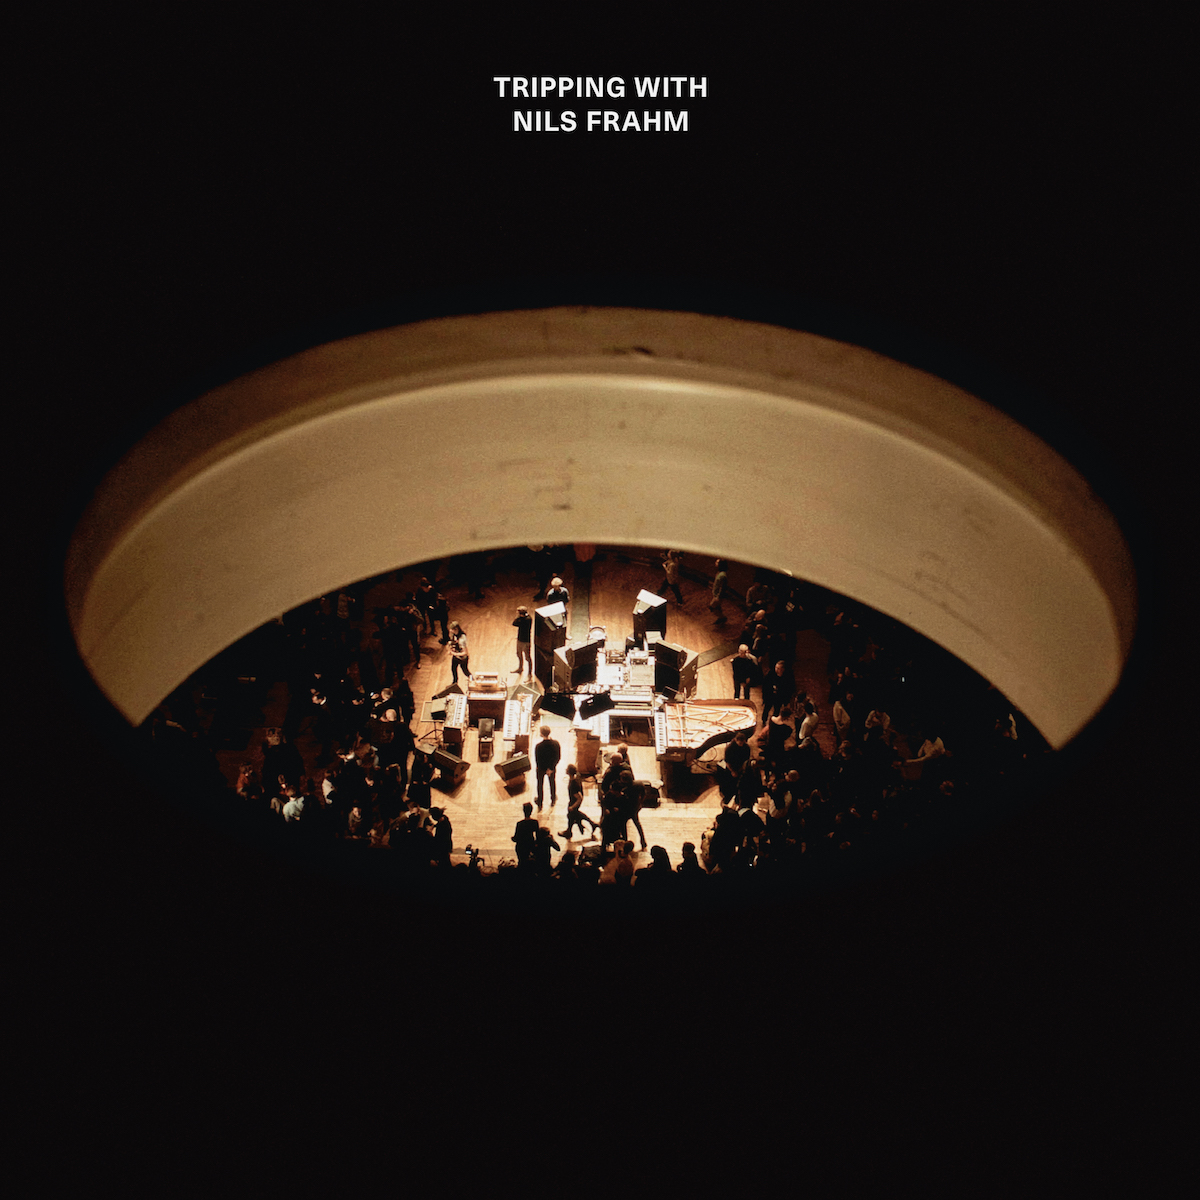 tripping with nils frahm live album cover art